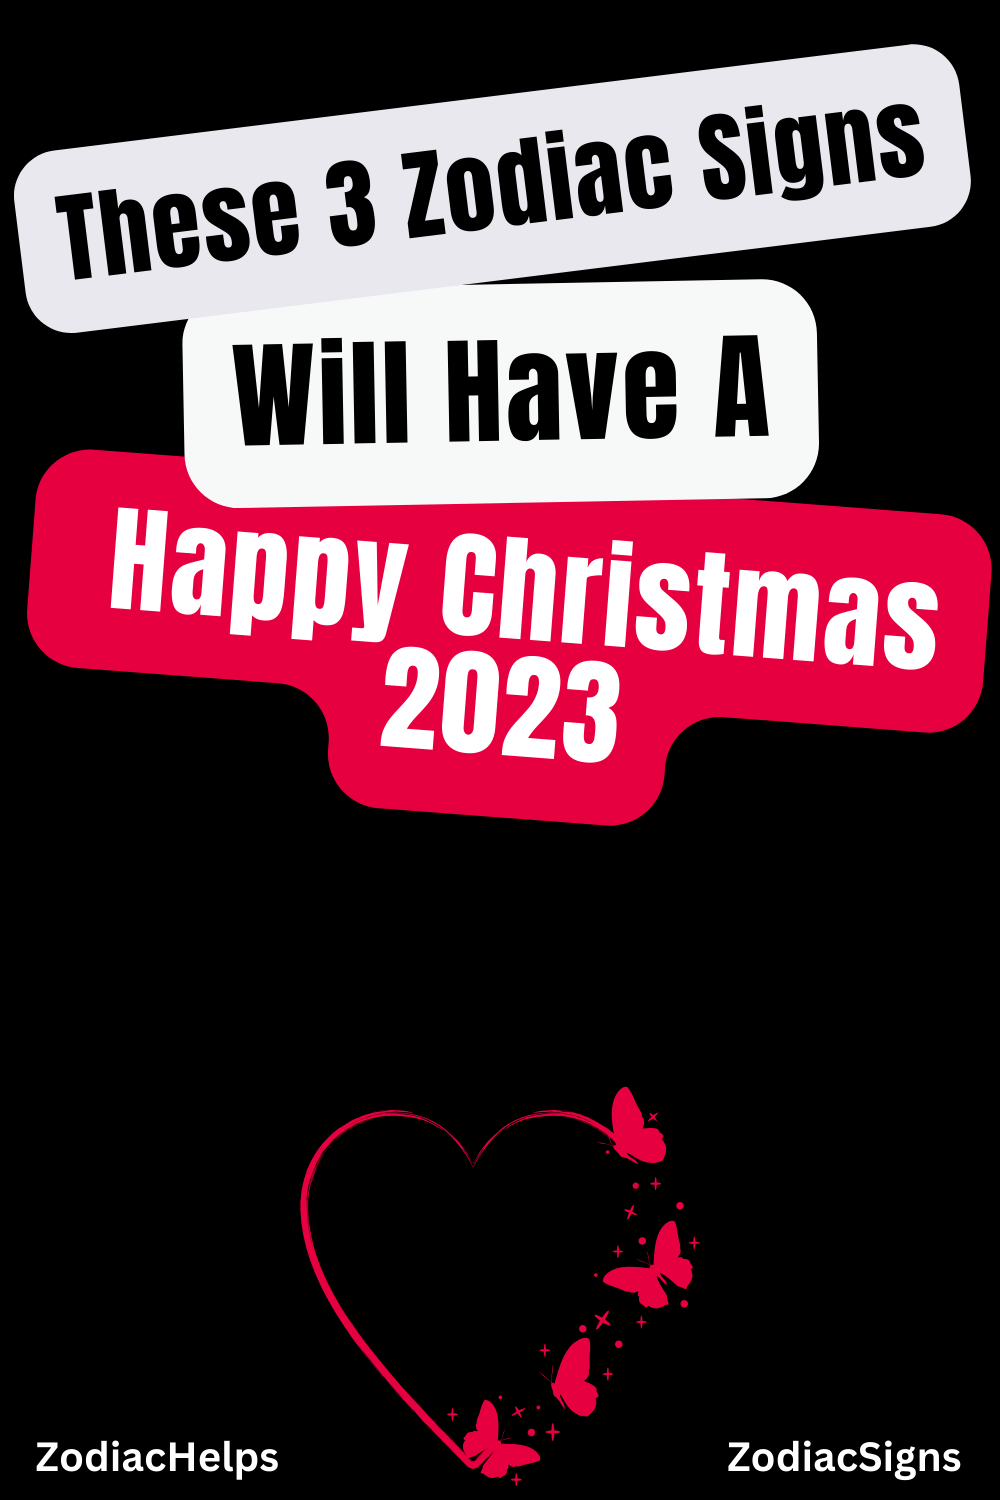 These 3 Zodiac Signs Will Have A Happy Christmas 2023